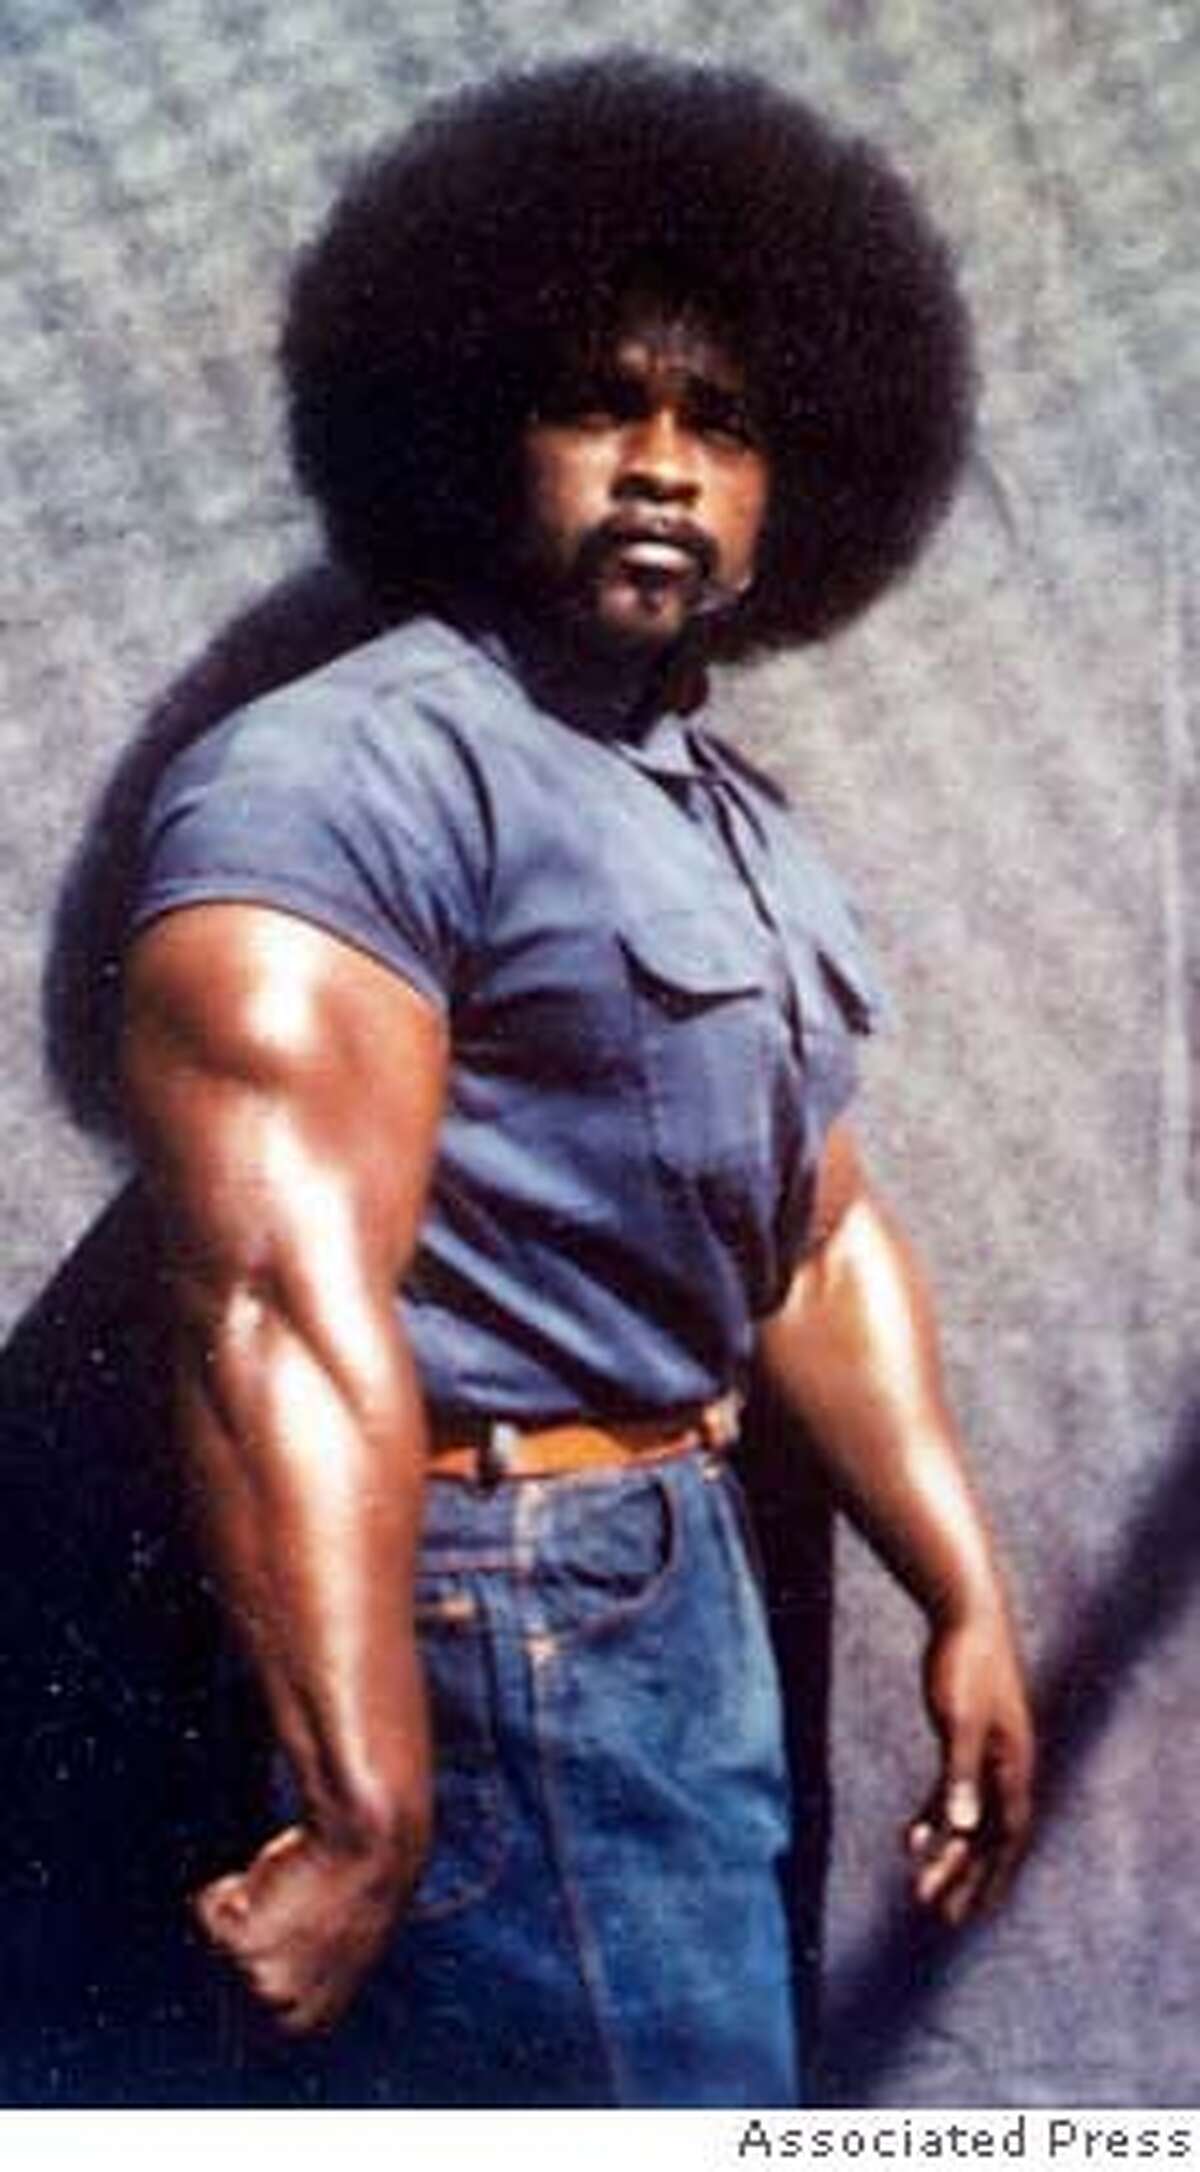 ** FILE ** In this undated file photo, Stanley "Tookie" Williams poses at age 29 in the exercise yard at San Quentin Prison. Williams, a founder of the notorious Crips street gang, is scheduled to be executed next month and is asking Gov. Arnold Schwarzenegger for clemency. A 13-page petition seeking to save the life of Stanley "Tookie" Williams was delivered to the governor today. (AP Photo/Courtesty of Williams Family, File) UNDATED HANDOUT